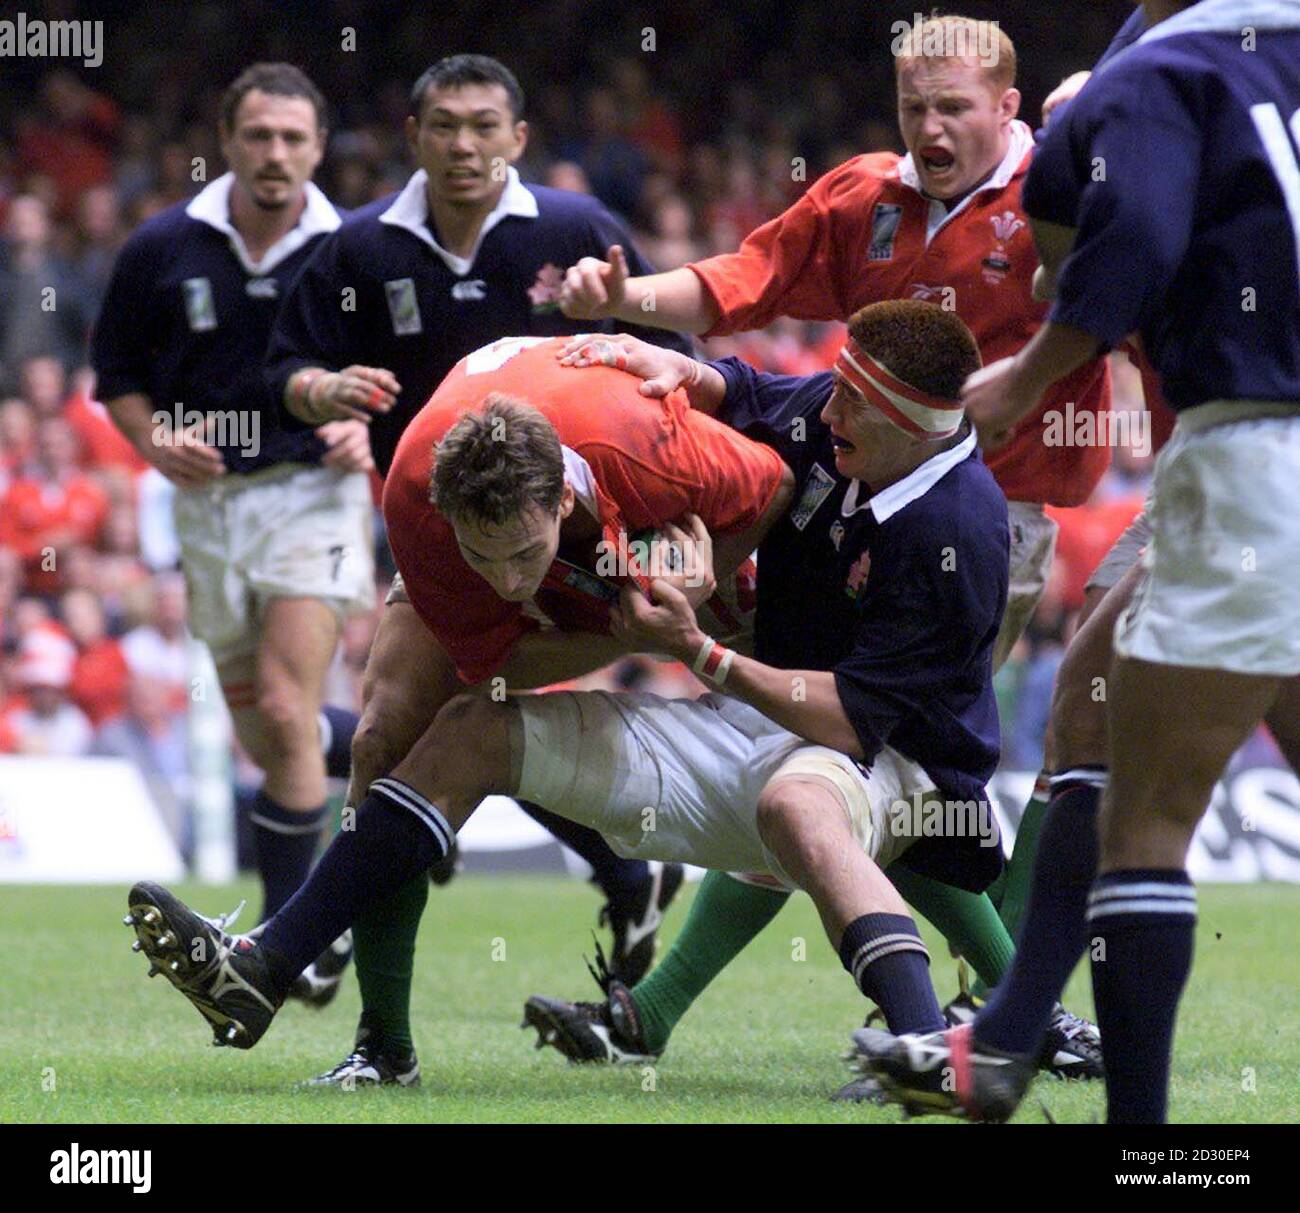 Wales ' Jason Jones-Hughes is hauled down yards from the line by  Japan 's Hiroyuki Tanuma  during the Rugby World Cup match at the Millennium Stadium in Cardiff.  Wales won the match 65-15.  Stock Photo